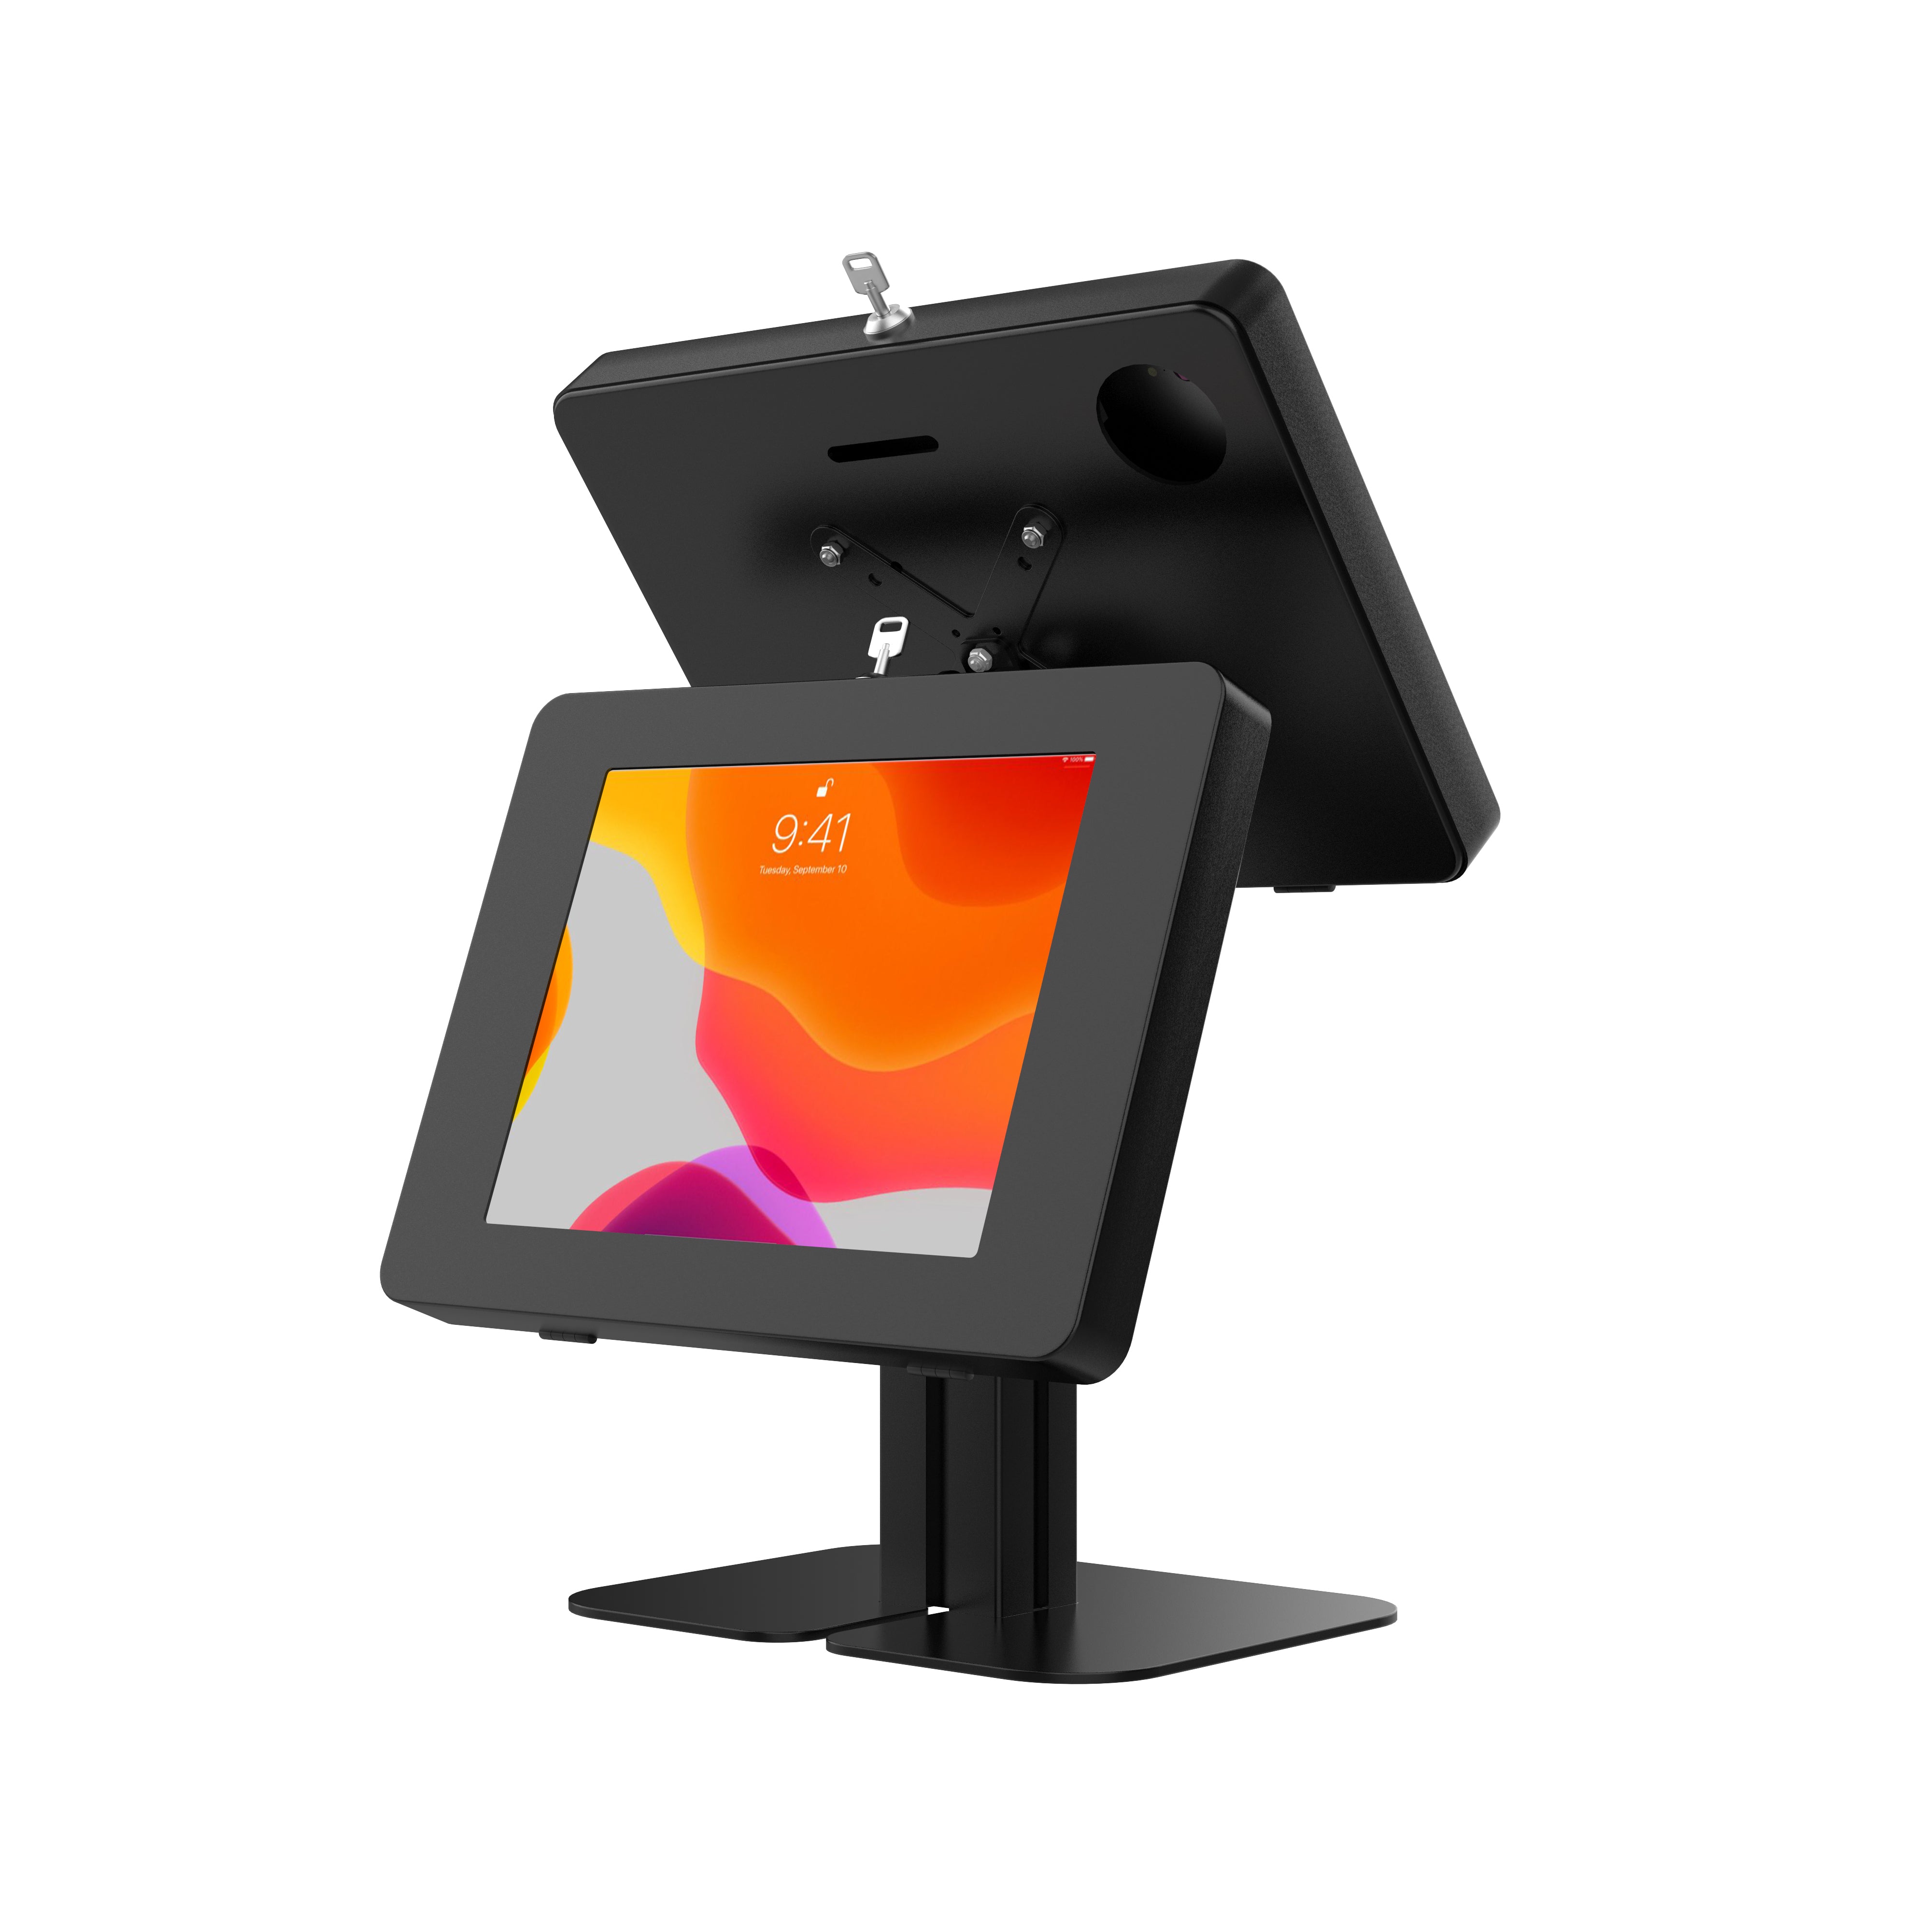 Adjustable Table Mount with 2 Universal Security Enclosures for 9.7 - 11 inches devices